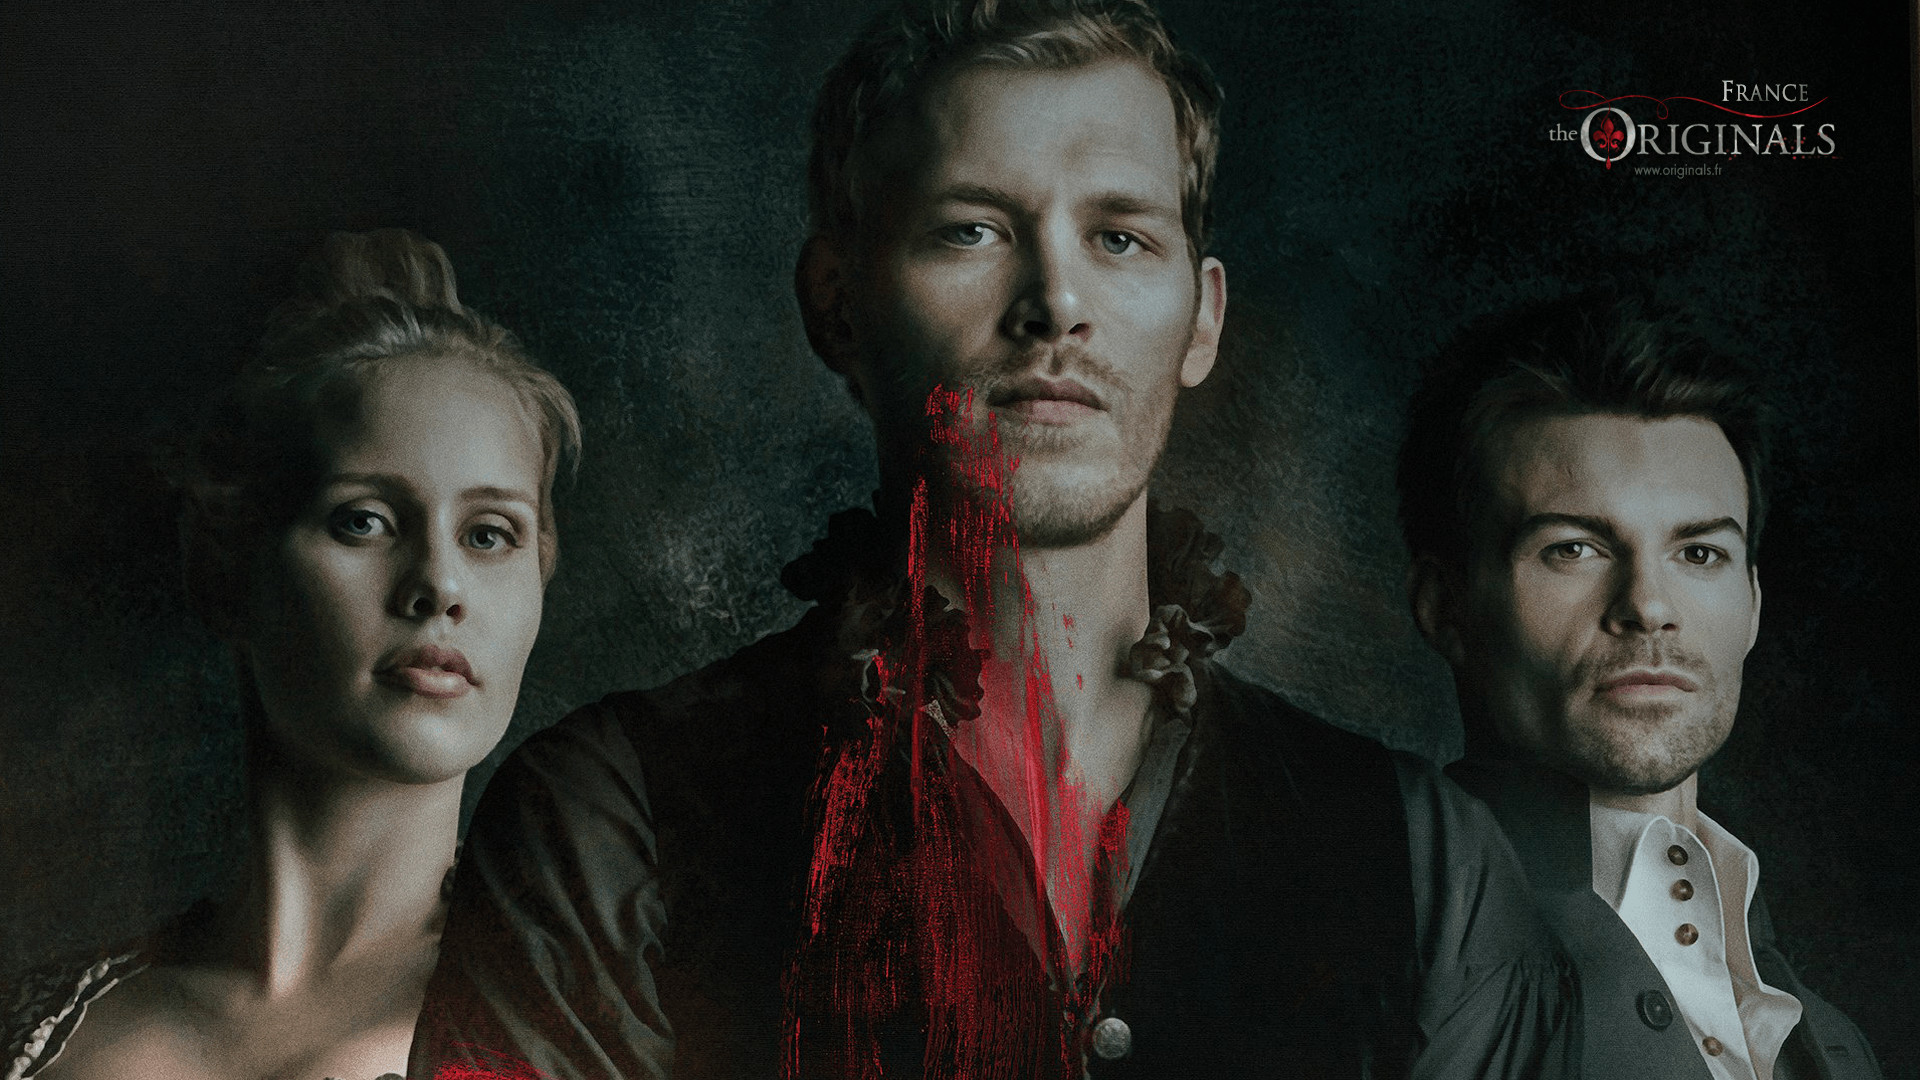 The Originals Wallpapers High Resolution And Quality Download 1920x1080